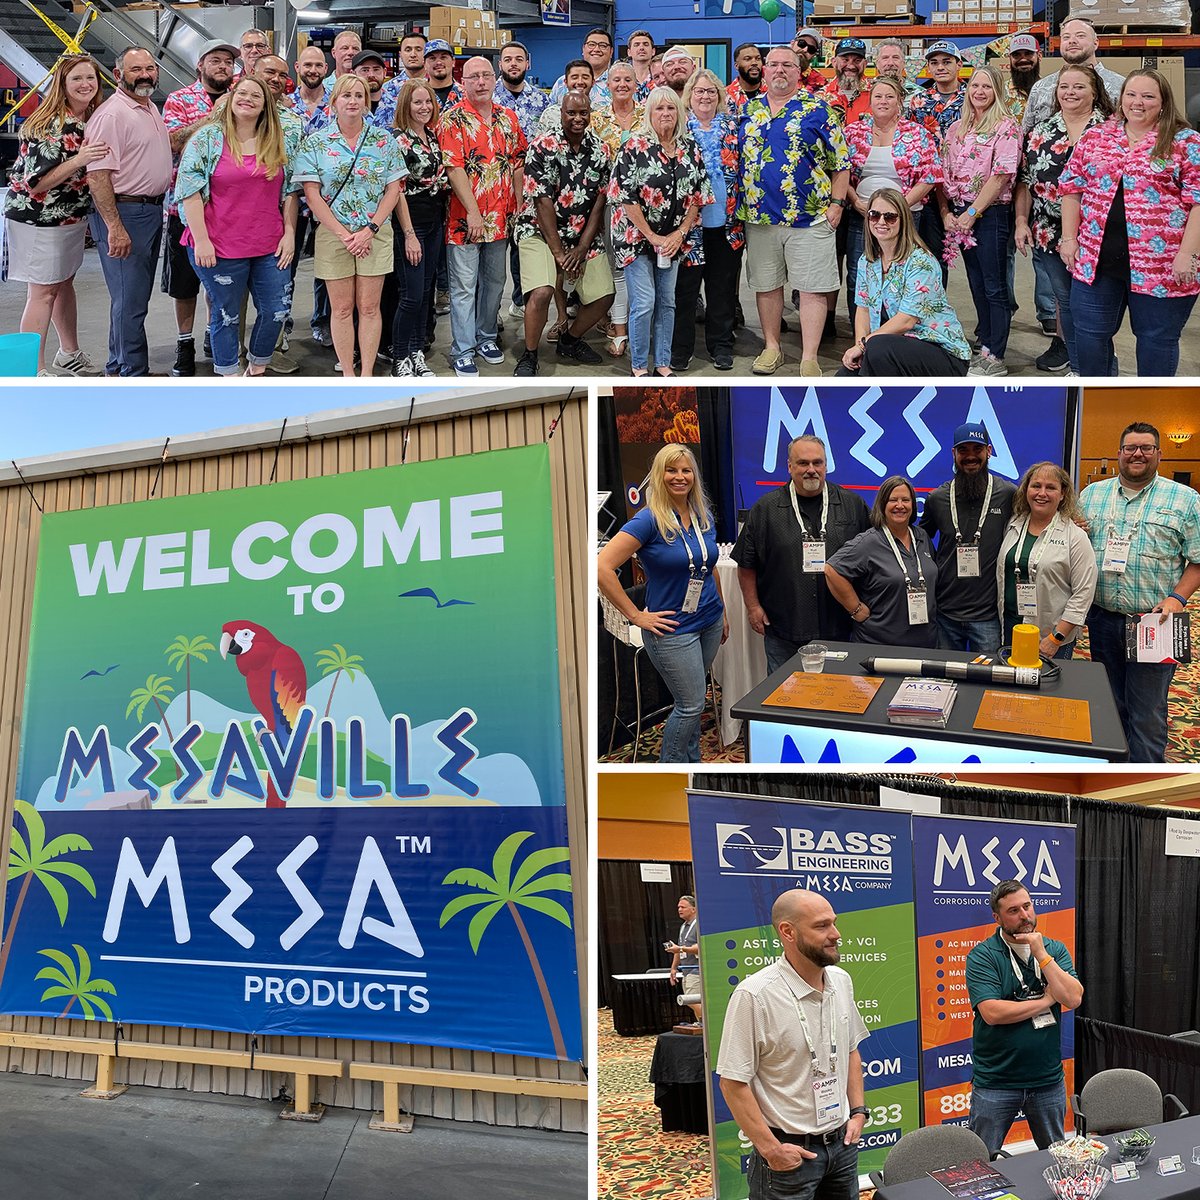 A few highlights from our week in Tulsa! We had a great time visiting with all those who stopped by our Booth at #AMPP Central or made it to our MESAVille event! 🌴 #MESAVille #CorrosionControl #amppcentral